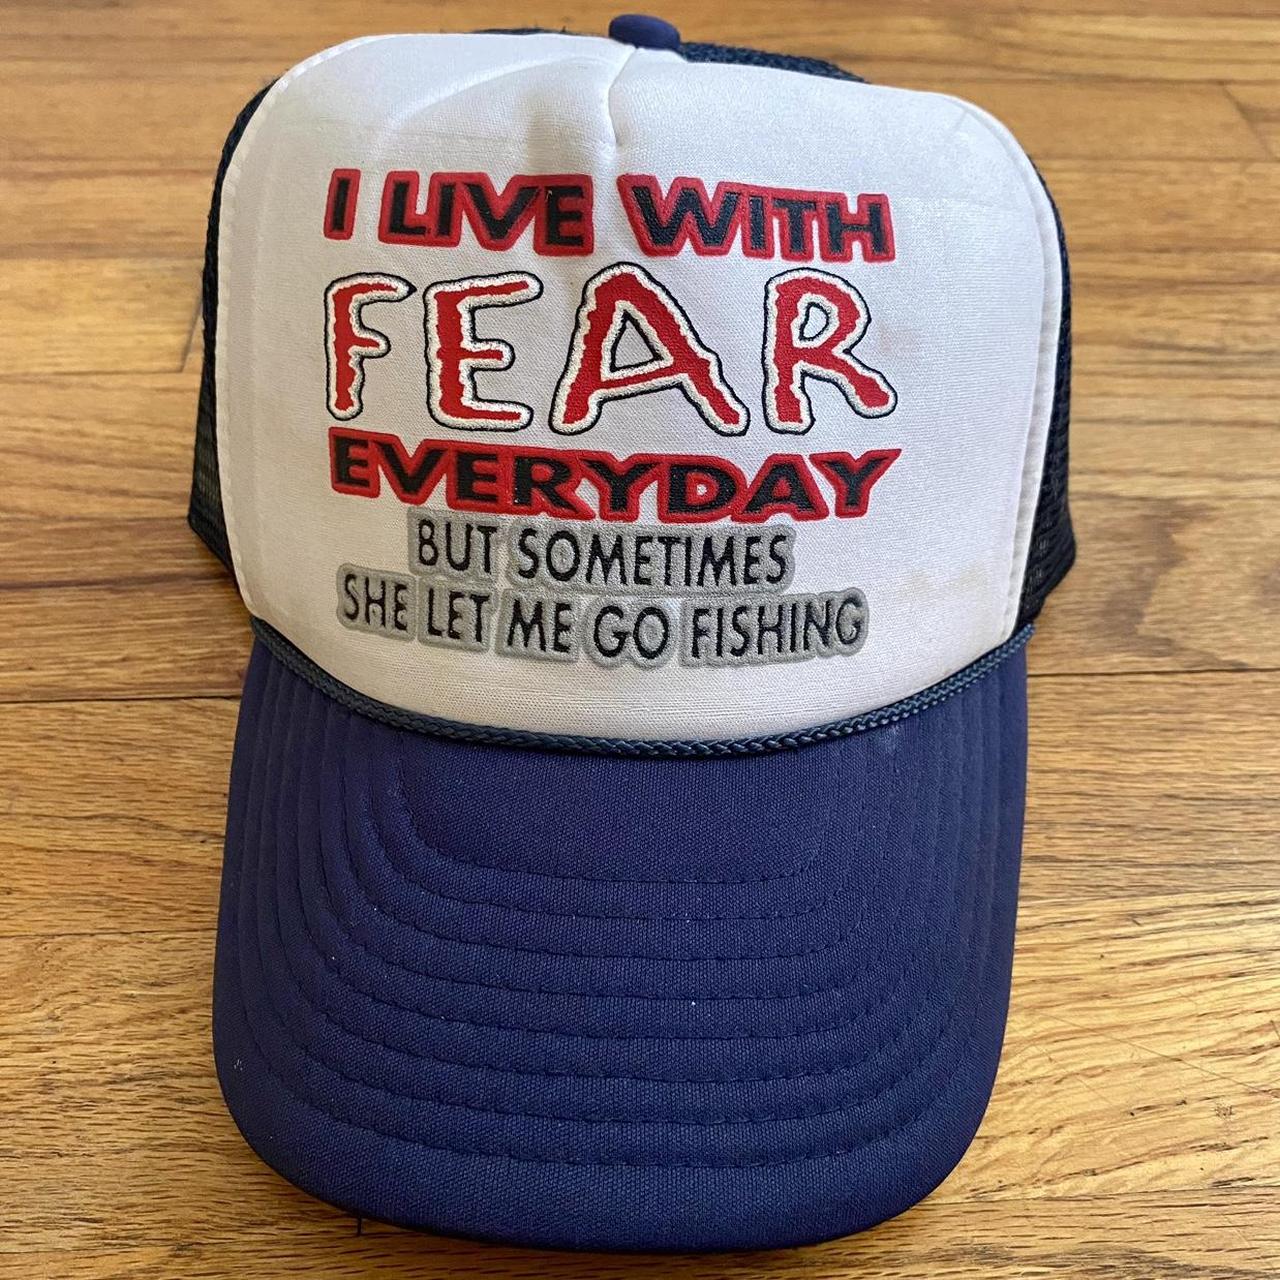 Vintage I live with Fear every day fishing humor - Depop